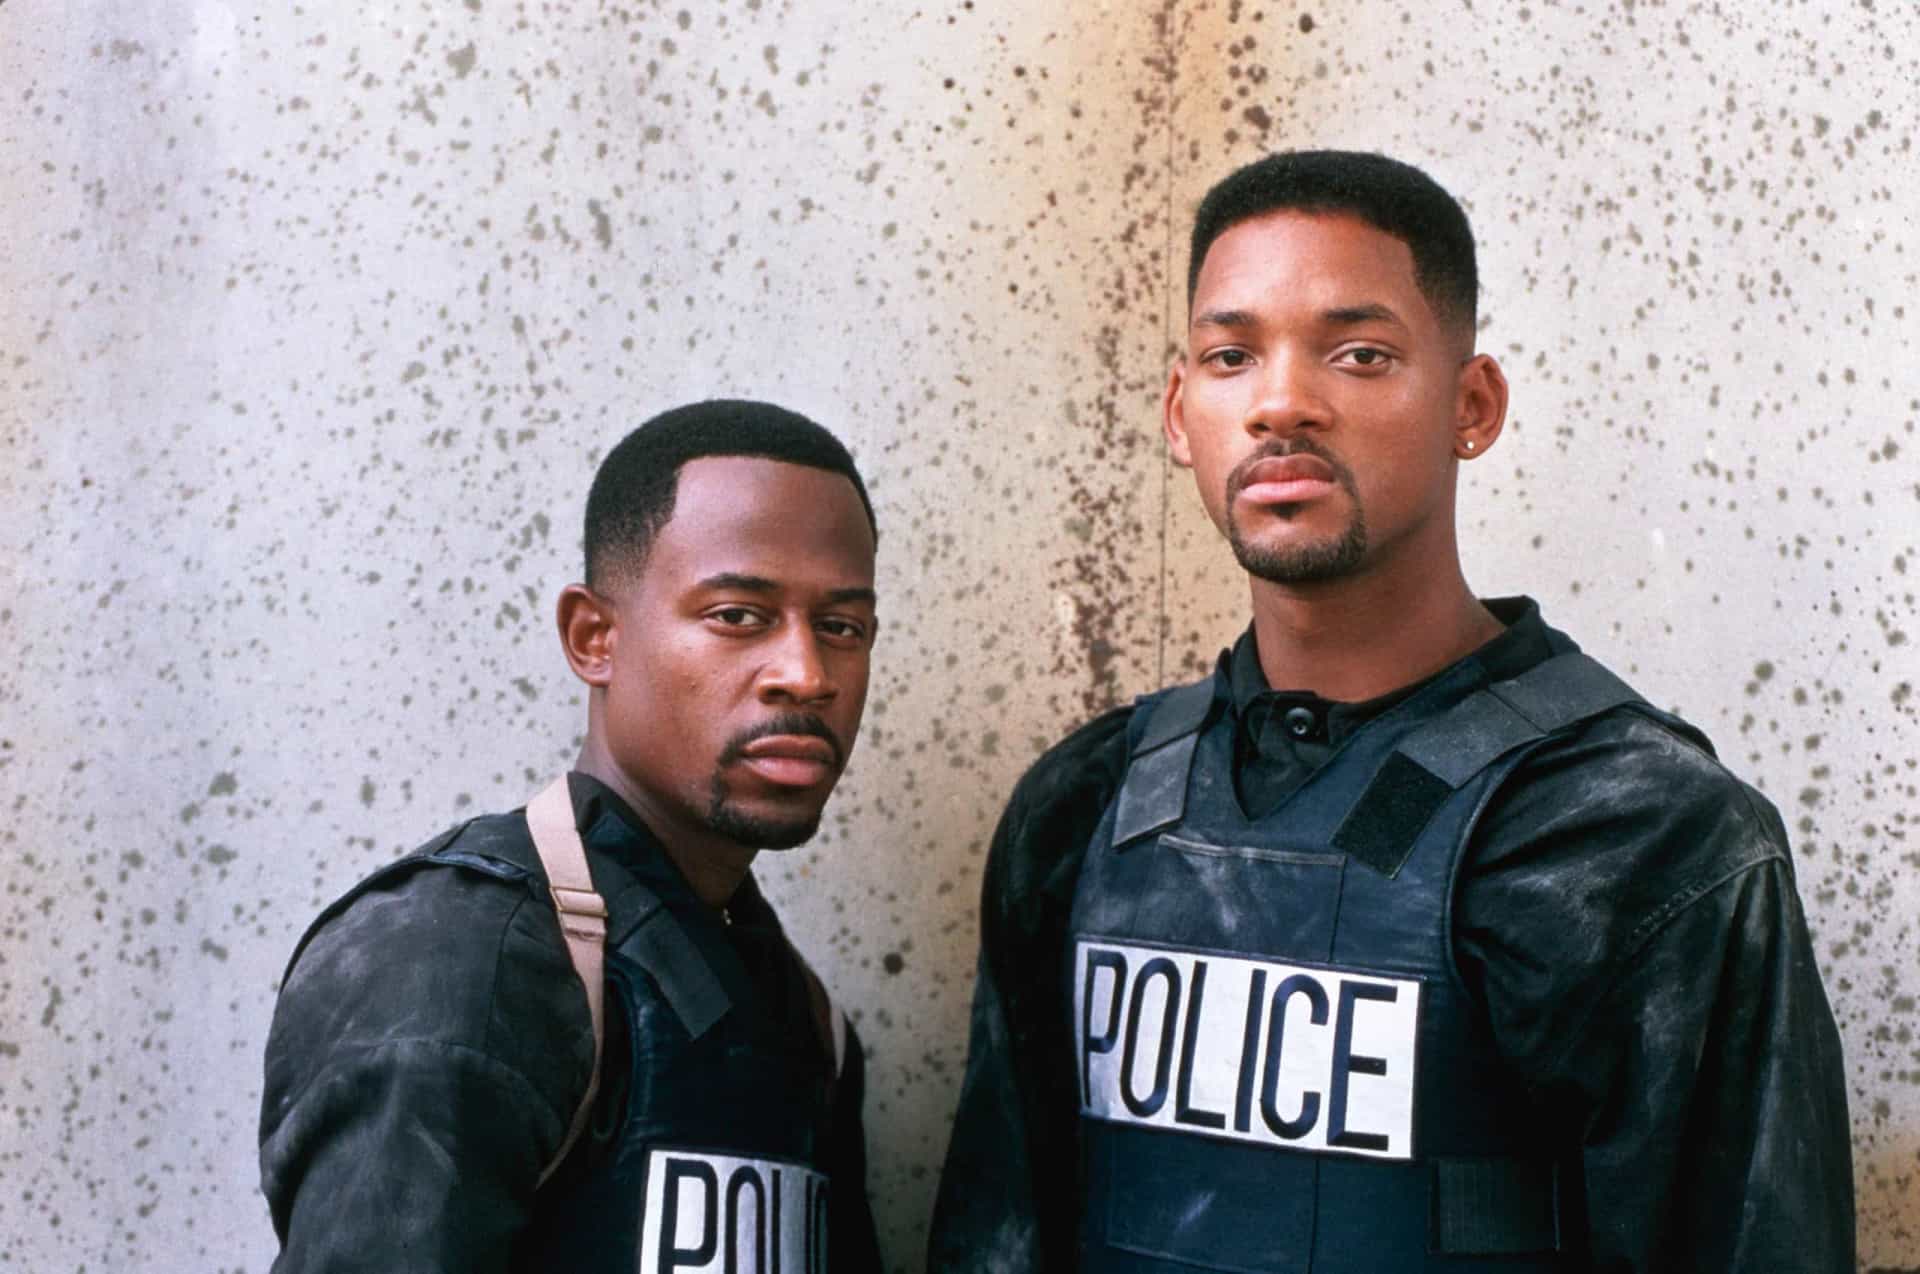 <p>This is the first 'Bad Boys' movie where we can watch Miami PD agents Mike Lowrey (Will Smith) and Marcus Burnett (Martin Lawrence) working together.</p><p>You may also like:<a href="https://www.starsinsider.com/n/339002?utm_source=msn.com&utm_medium=display&utm_campaign=referral_description&utm_content=519875en-us"> Surprising facts you didn't know about the Titanic</a></p>